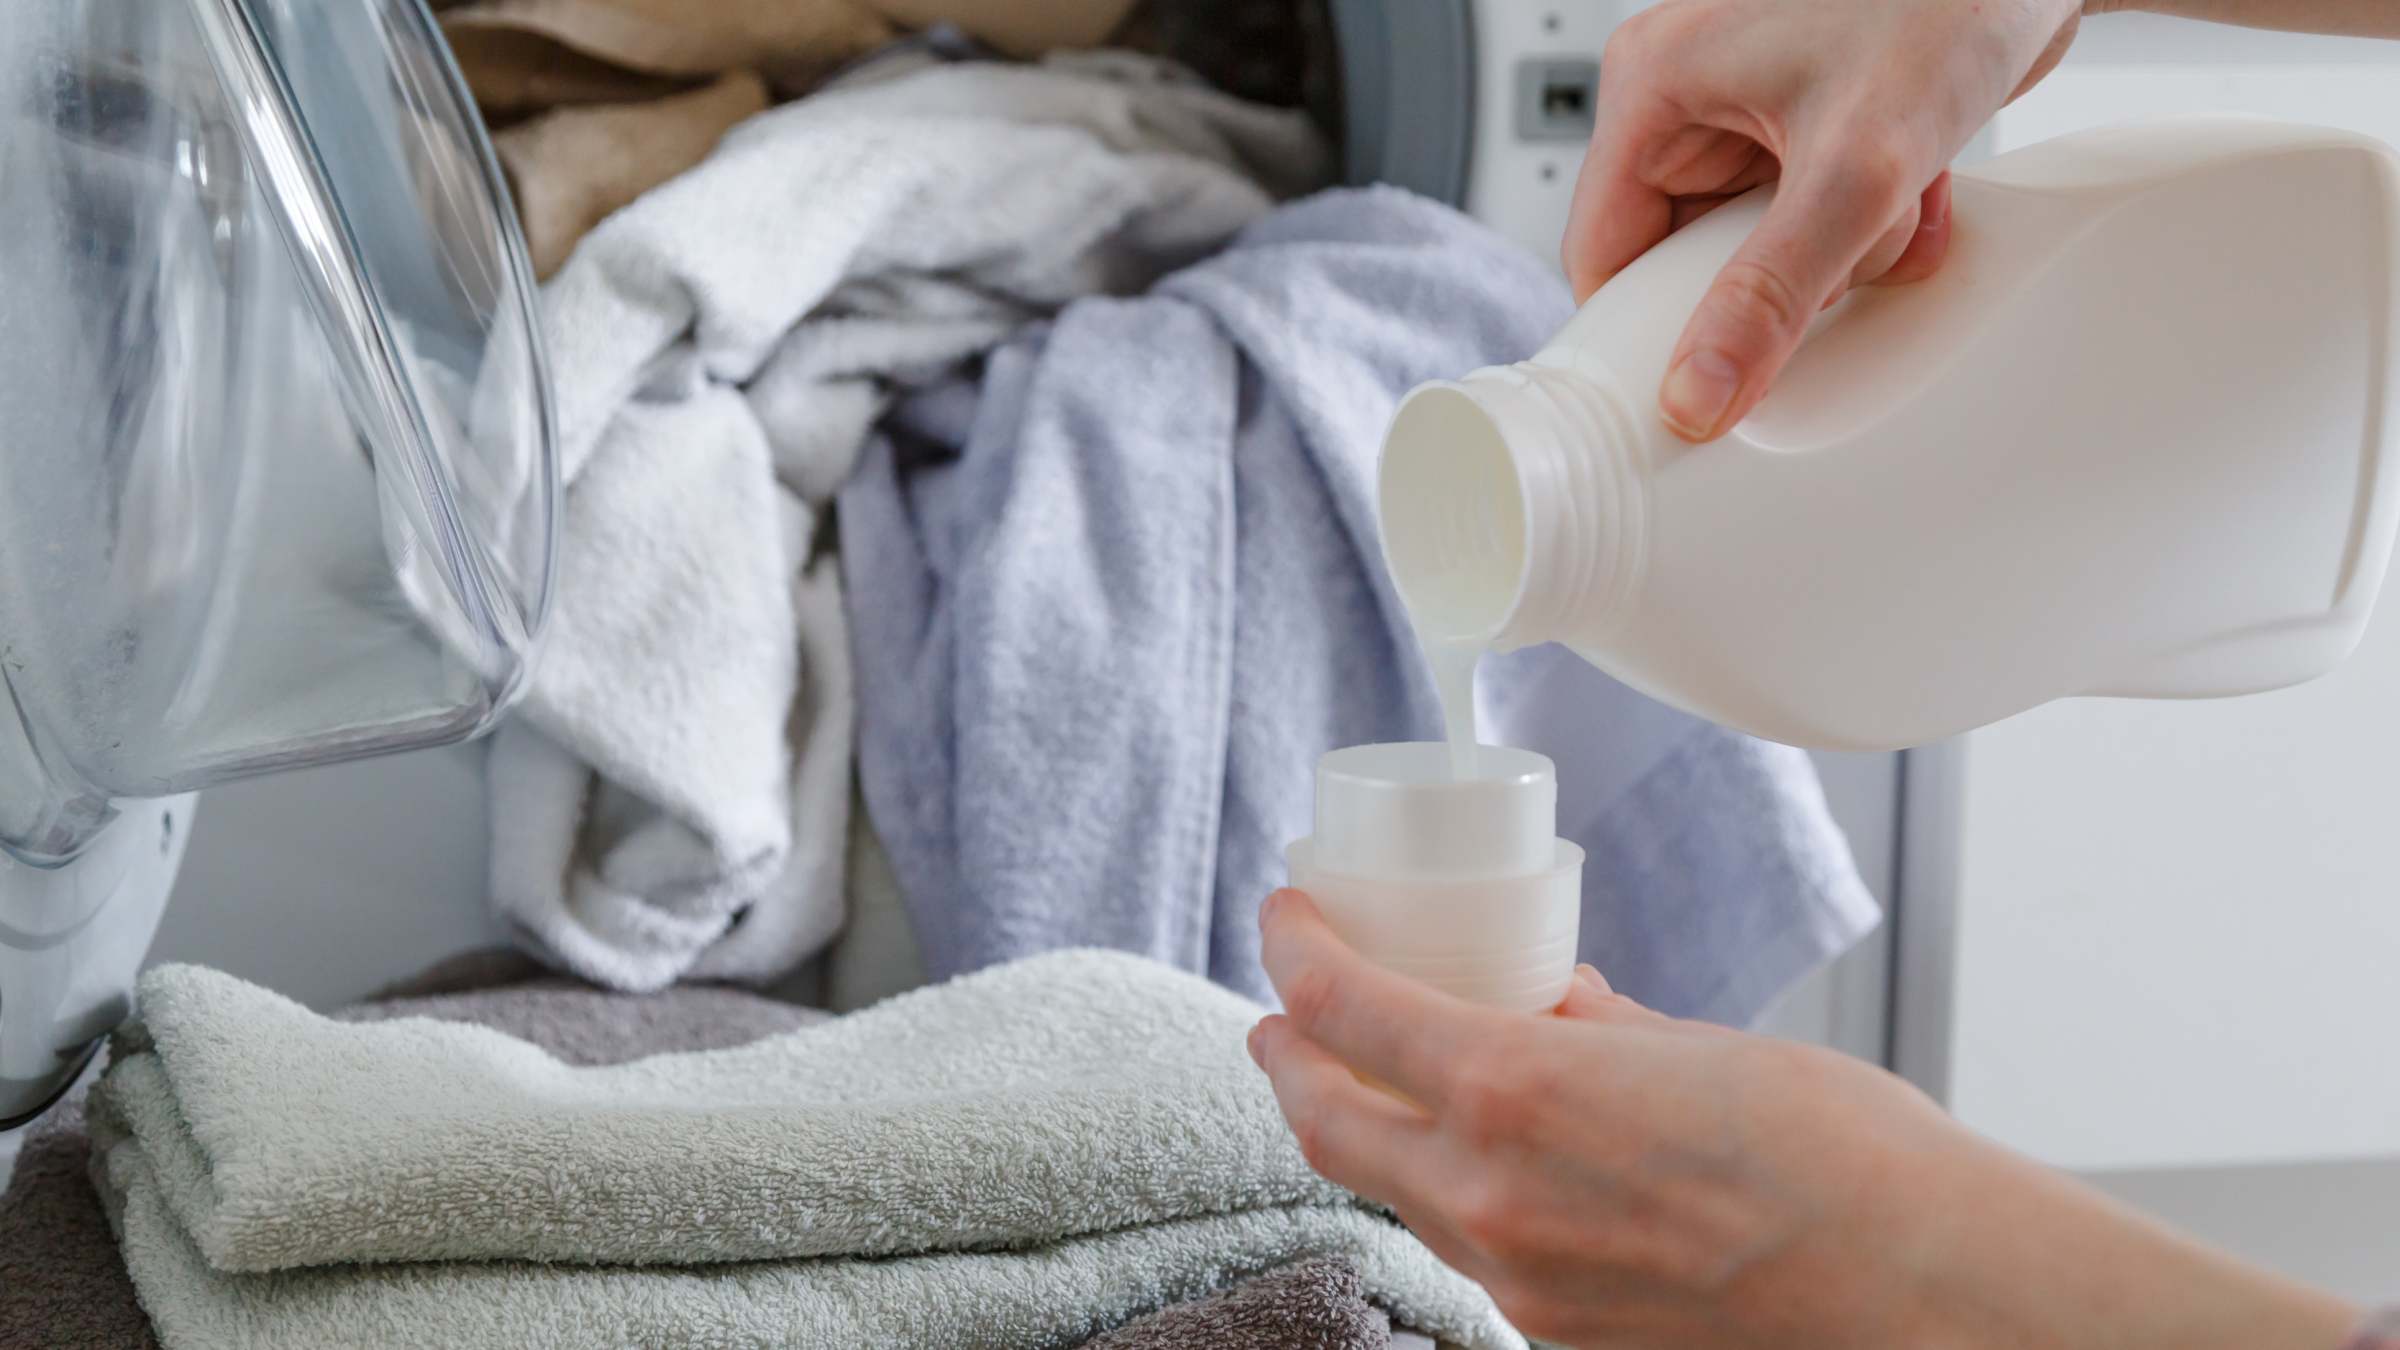 Powder vs liquid detergent - In terms of ease of use